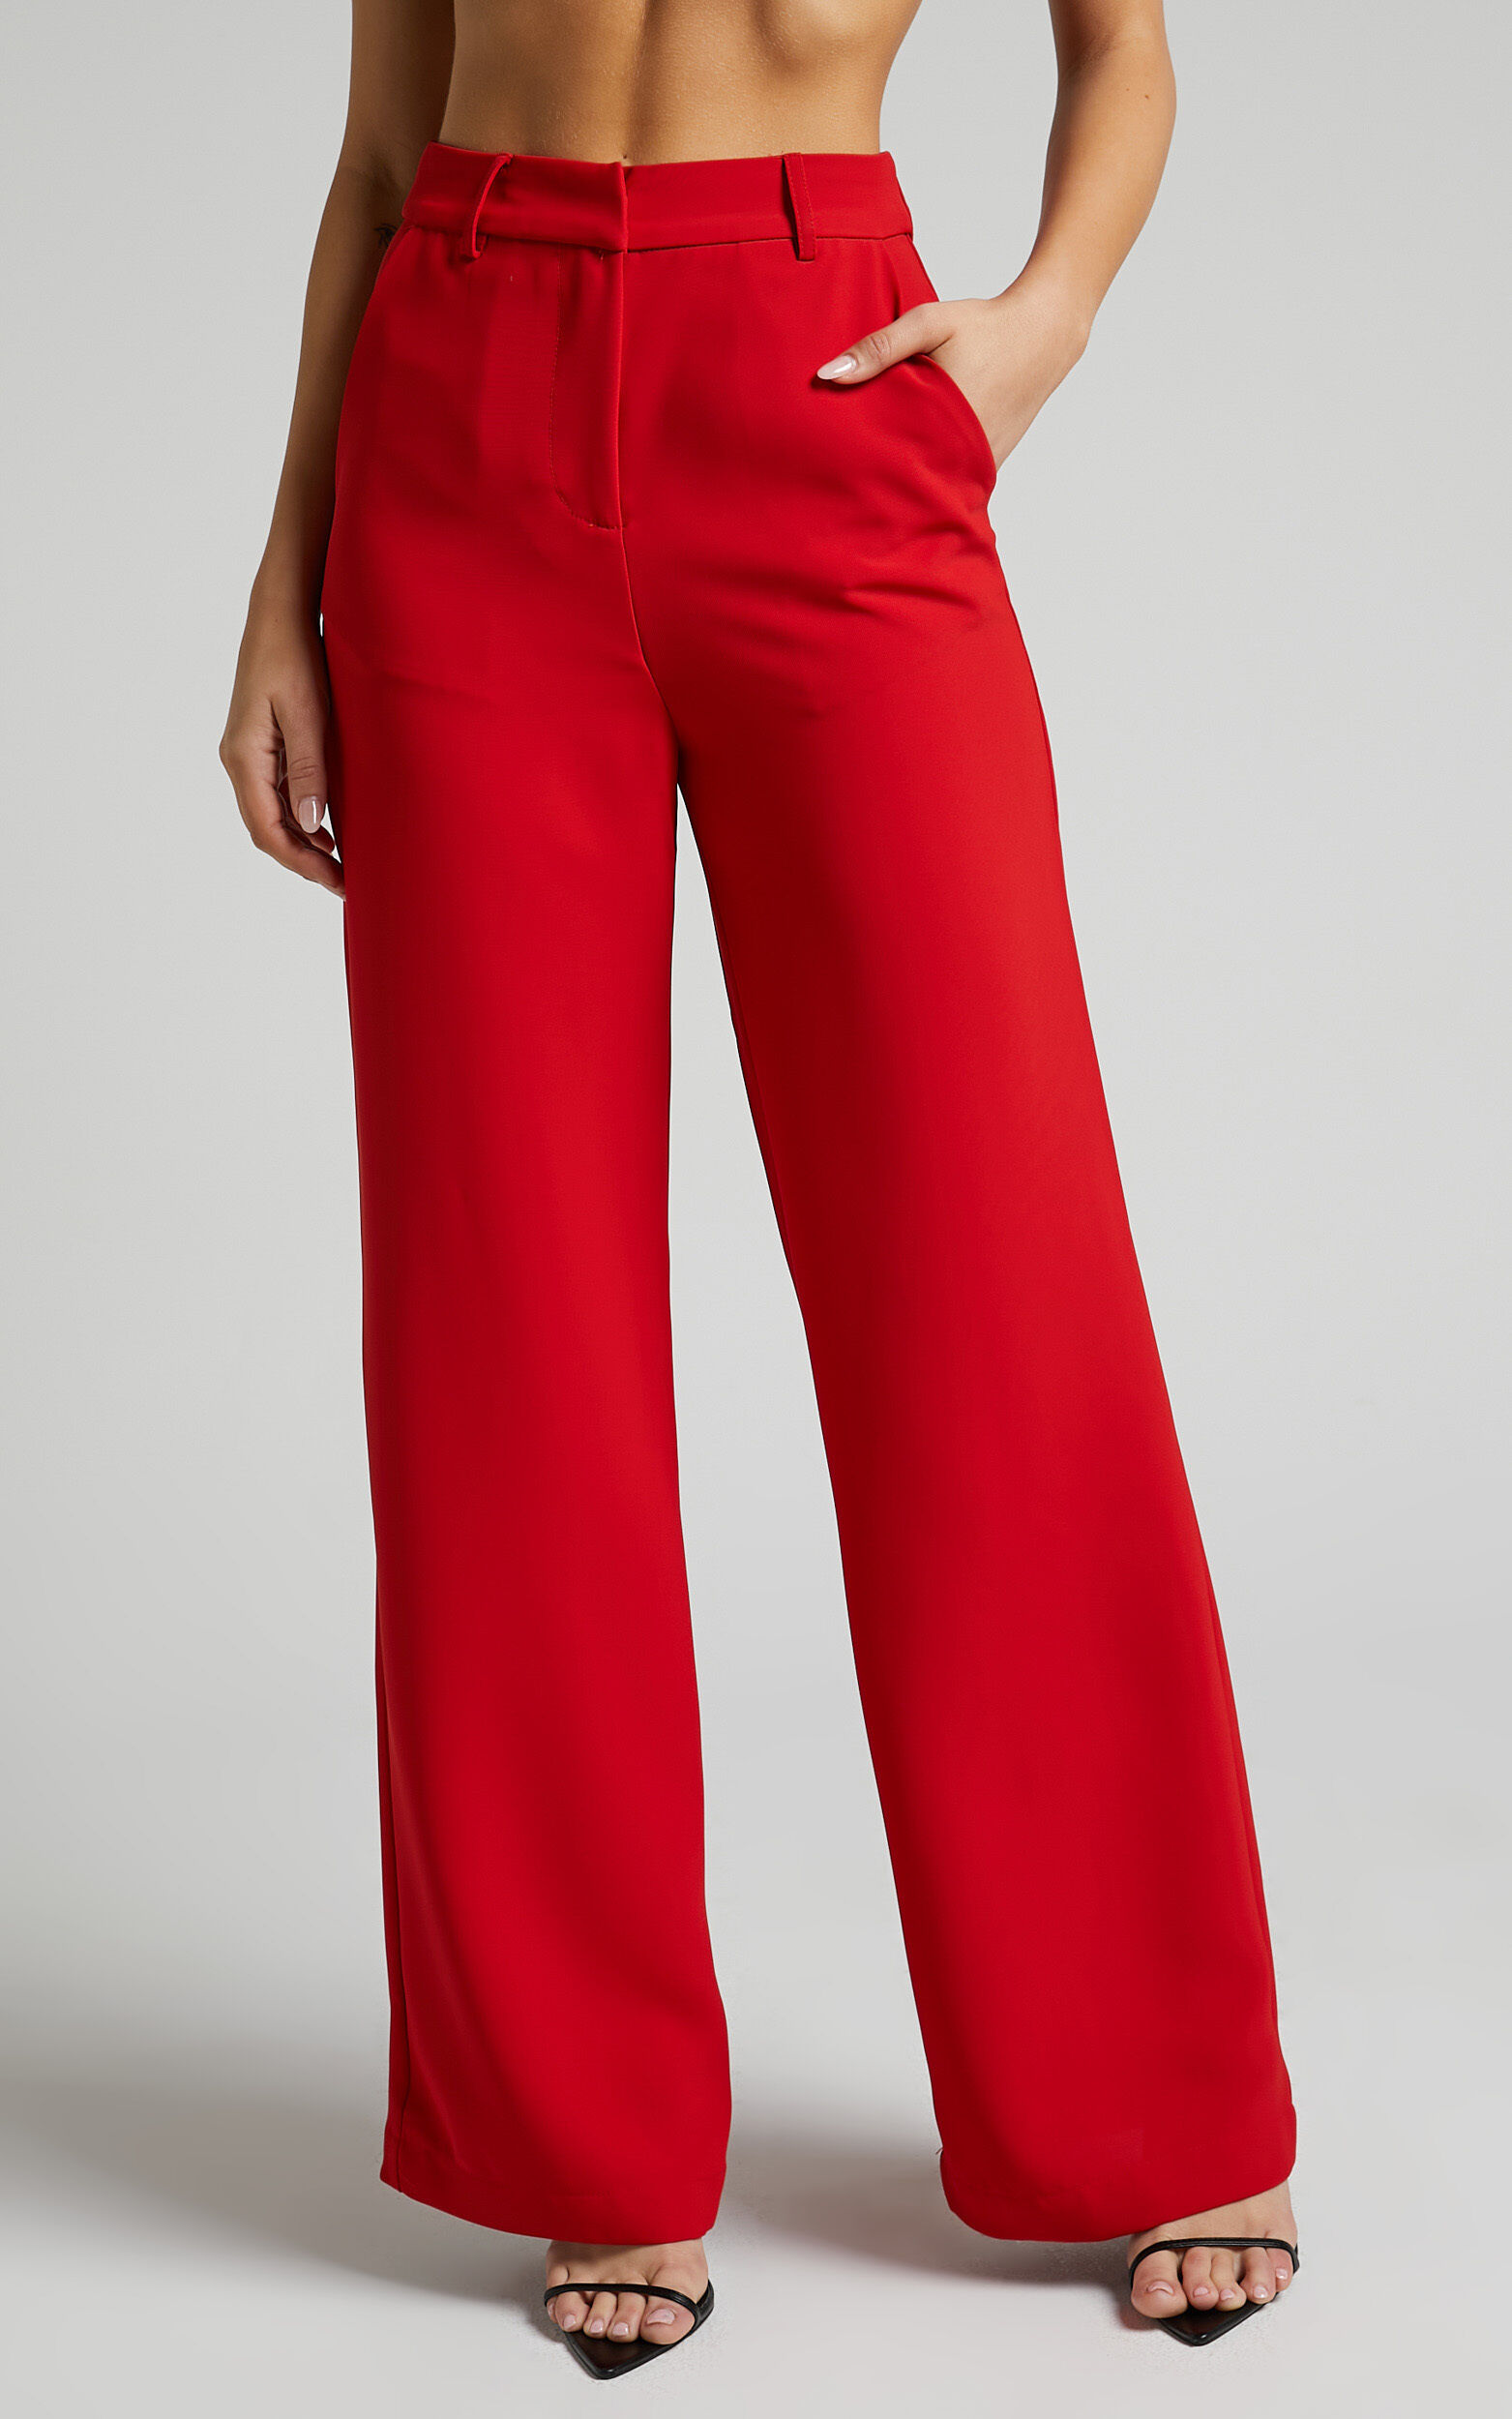 High Waisted Red Pants, Red Trousers, High Waisted Wide Leg Pants, Elegant  Trousers, Trousers With Pockets, Evening Pants -  Canada